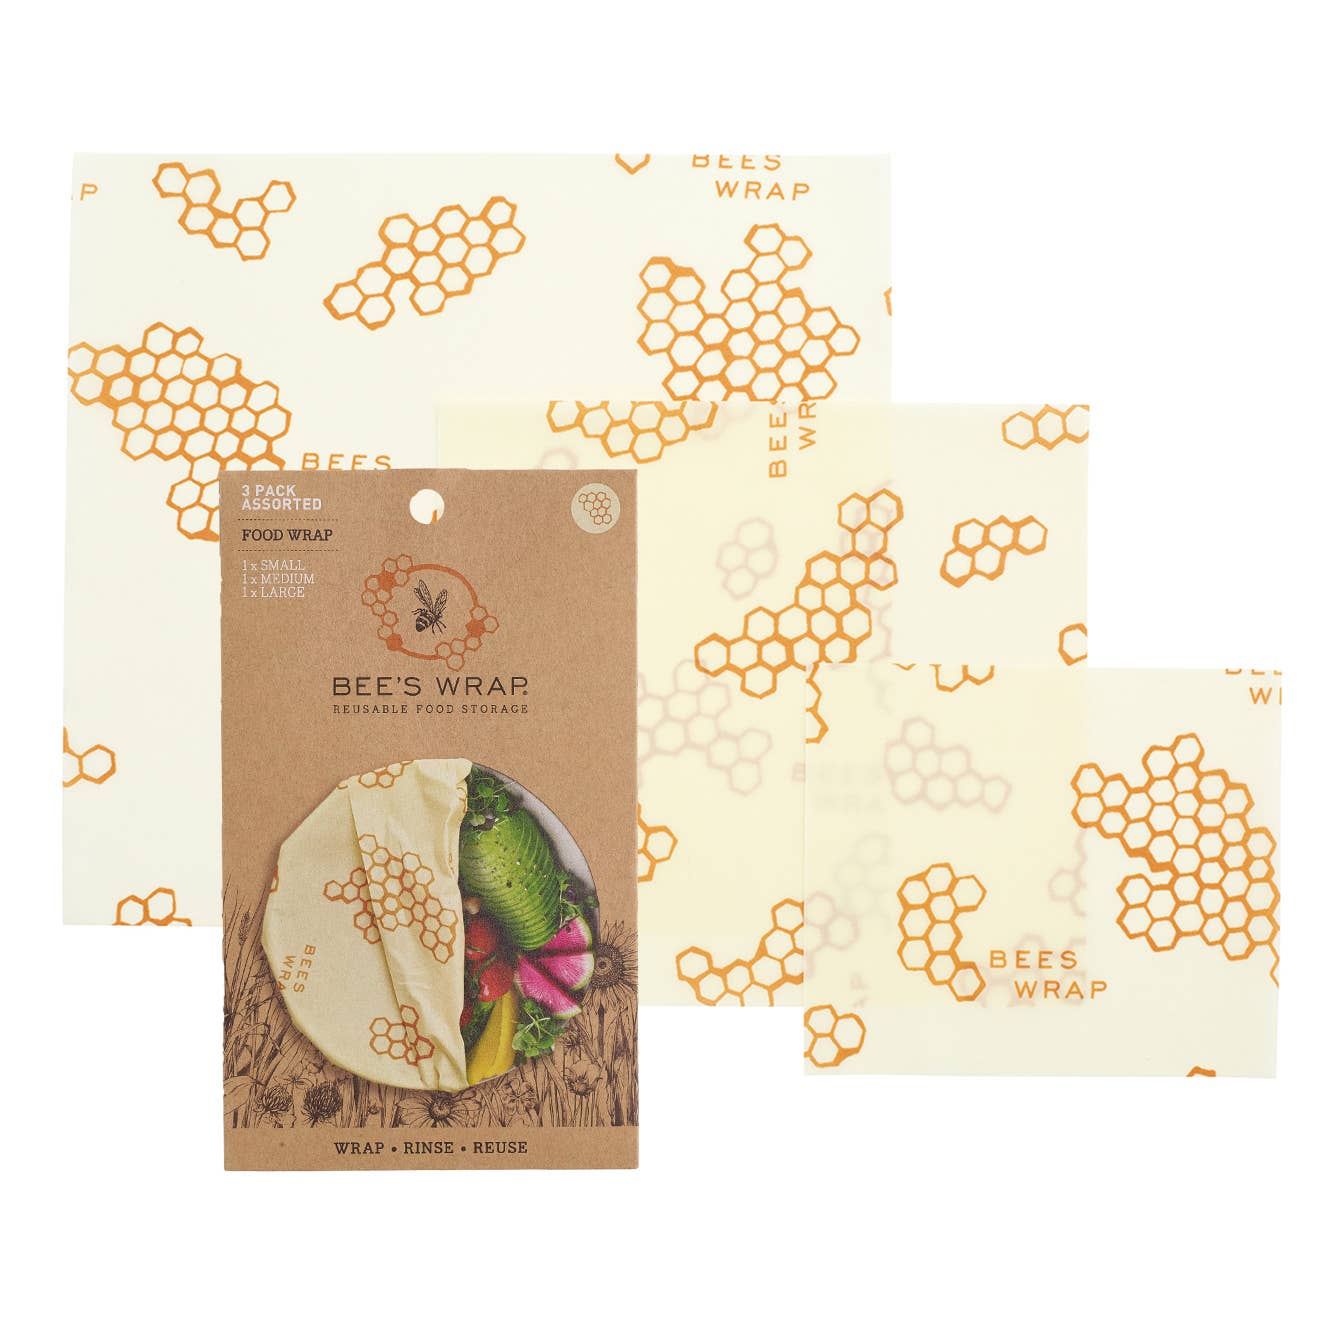  Bee's Wrap Reusable Beeswax Food Wraps Made in the USA, Eco  Friendly Beeswax Food Wrap, Sustainable Food Storage Containers, Organic  Cotton Food Wrap, XXL Cut To Size Wax Paper Roll, Honeycomb